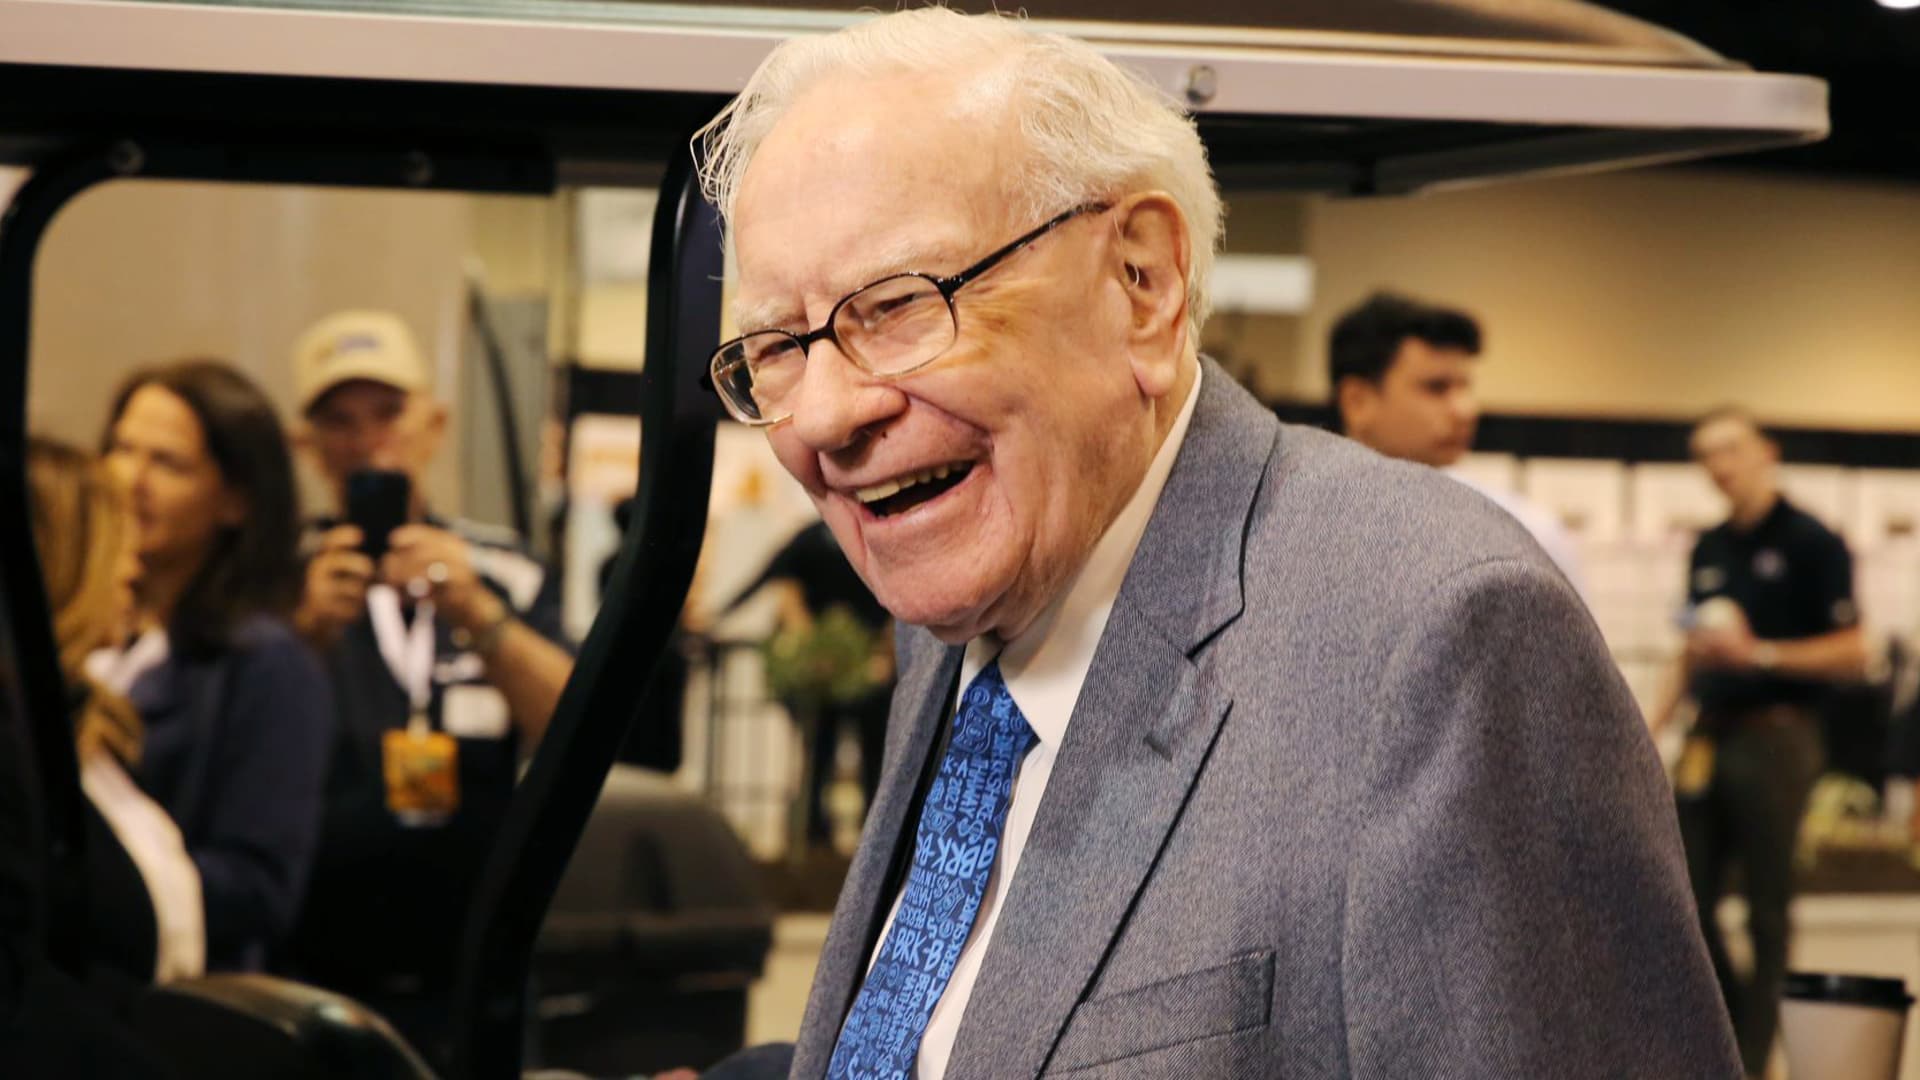 Berkshire shares jump after big profit gain as Buffett’s conglomerate nears  trillion valuation